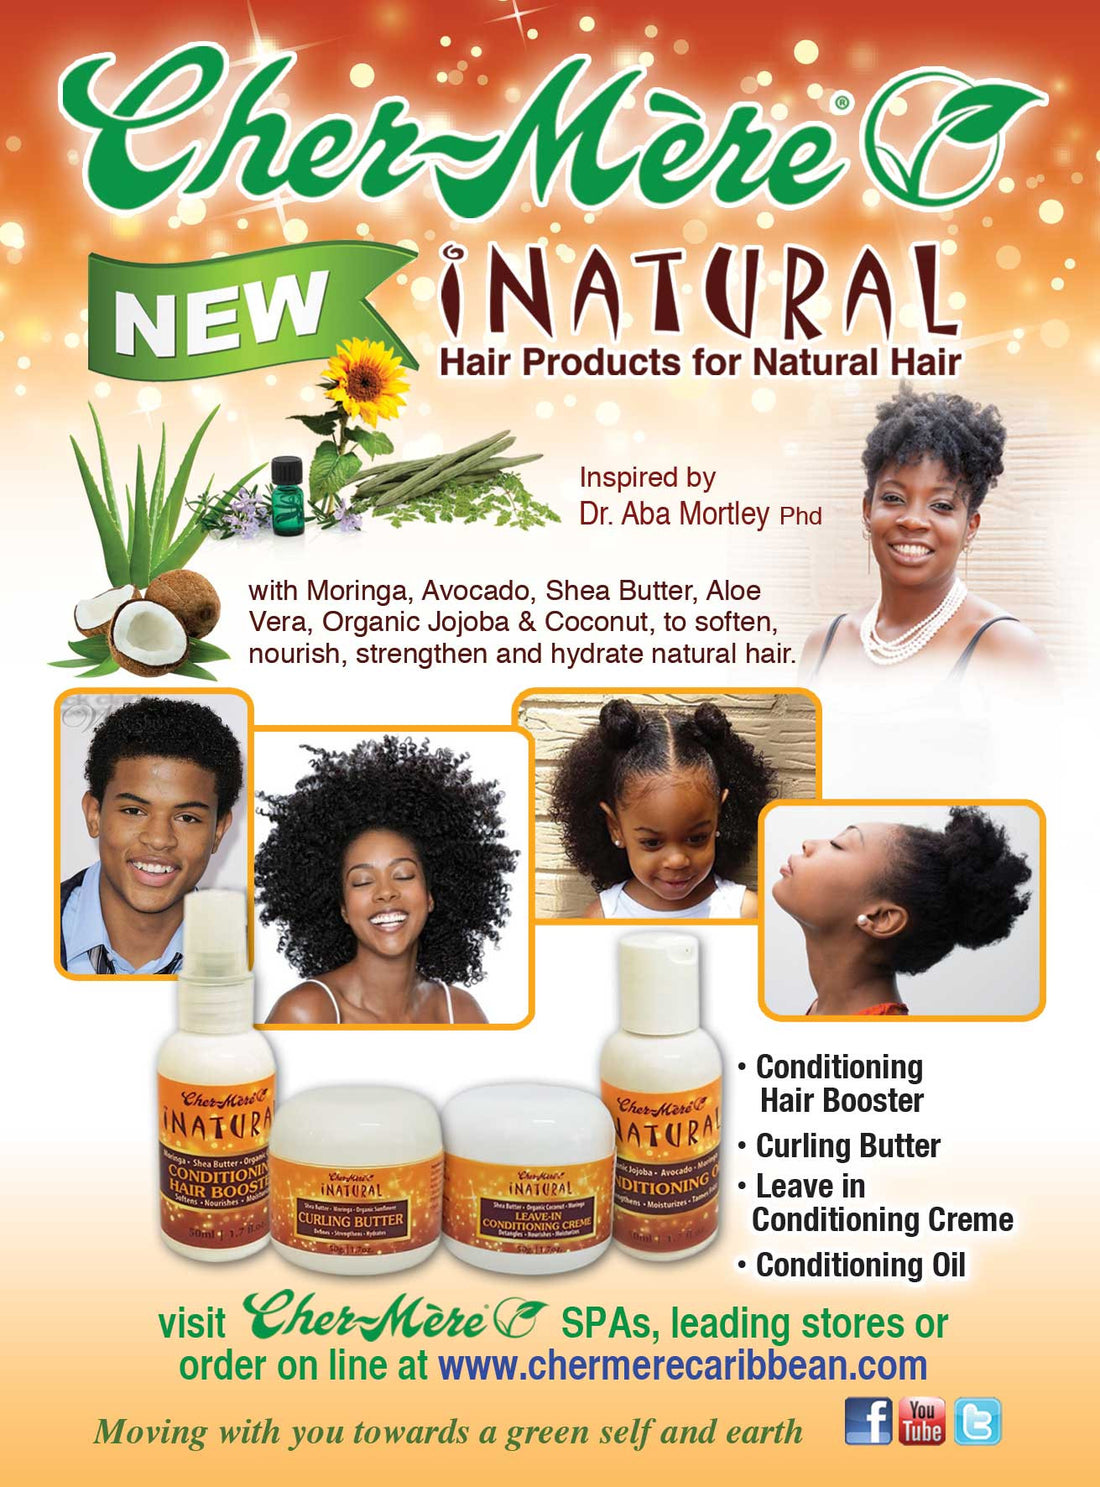 Why Moringa in Cher-Mère I-Natural Products for Natural Hair?